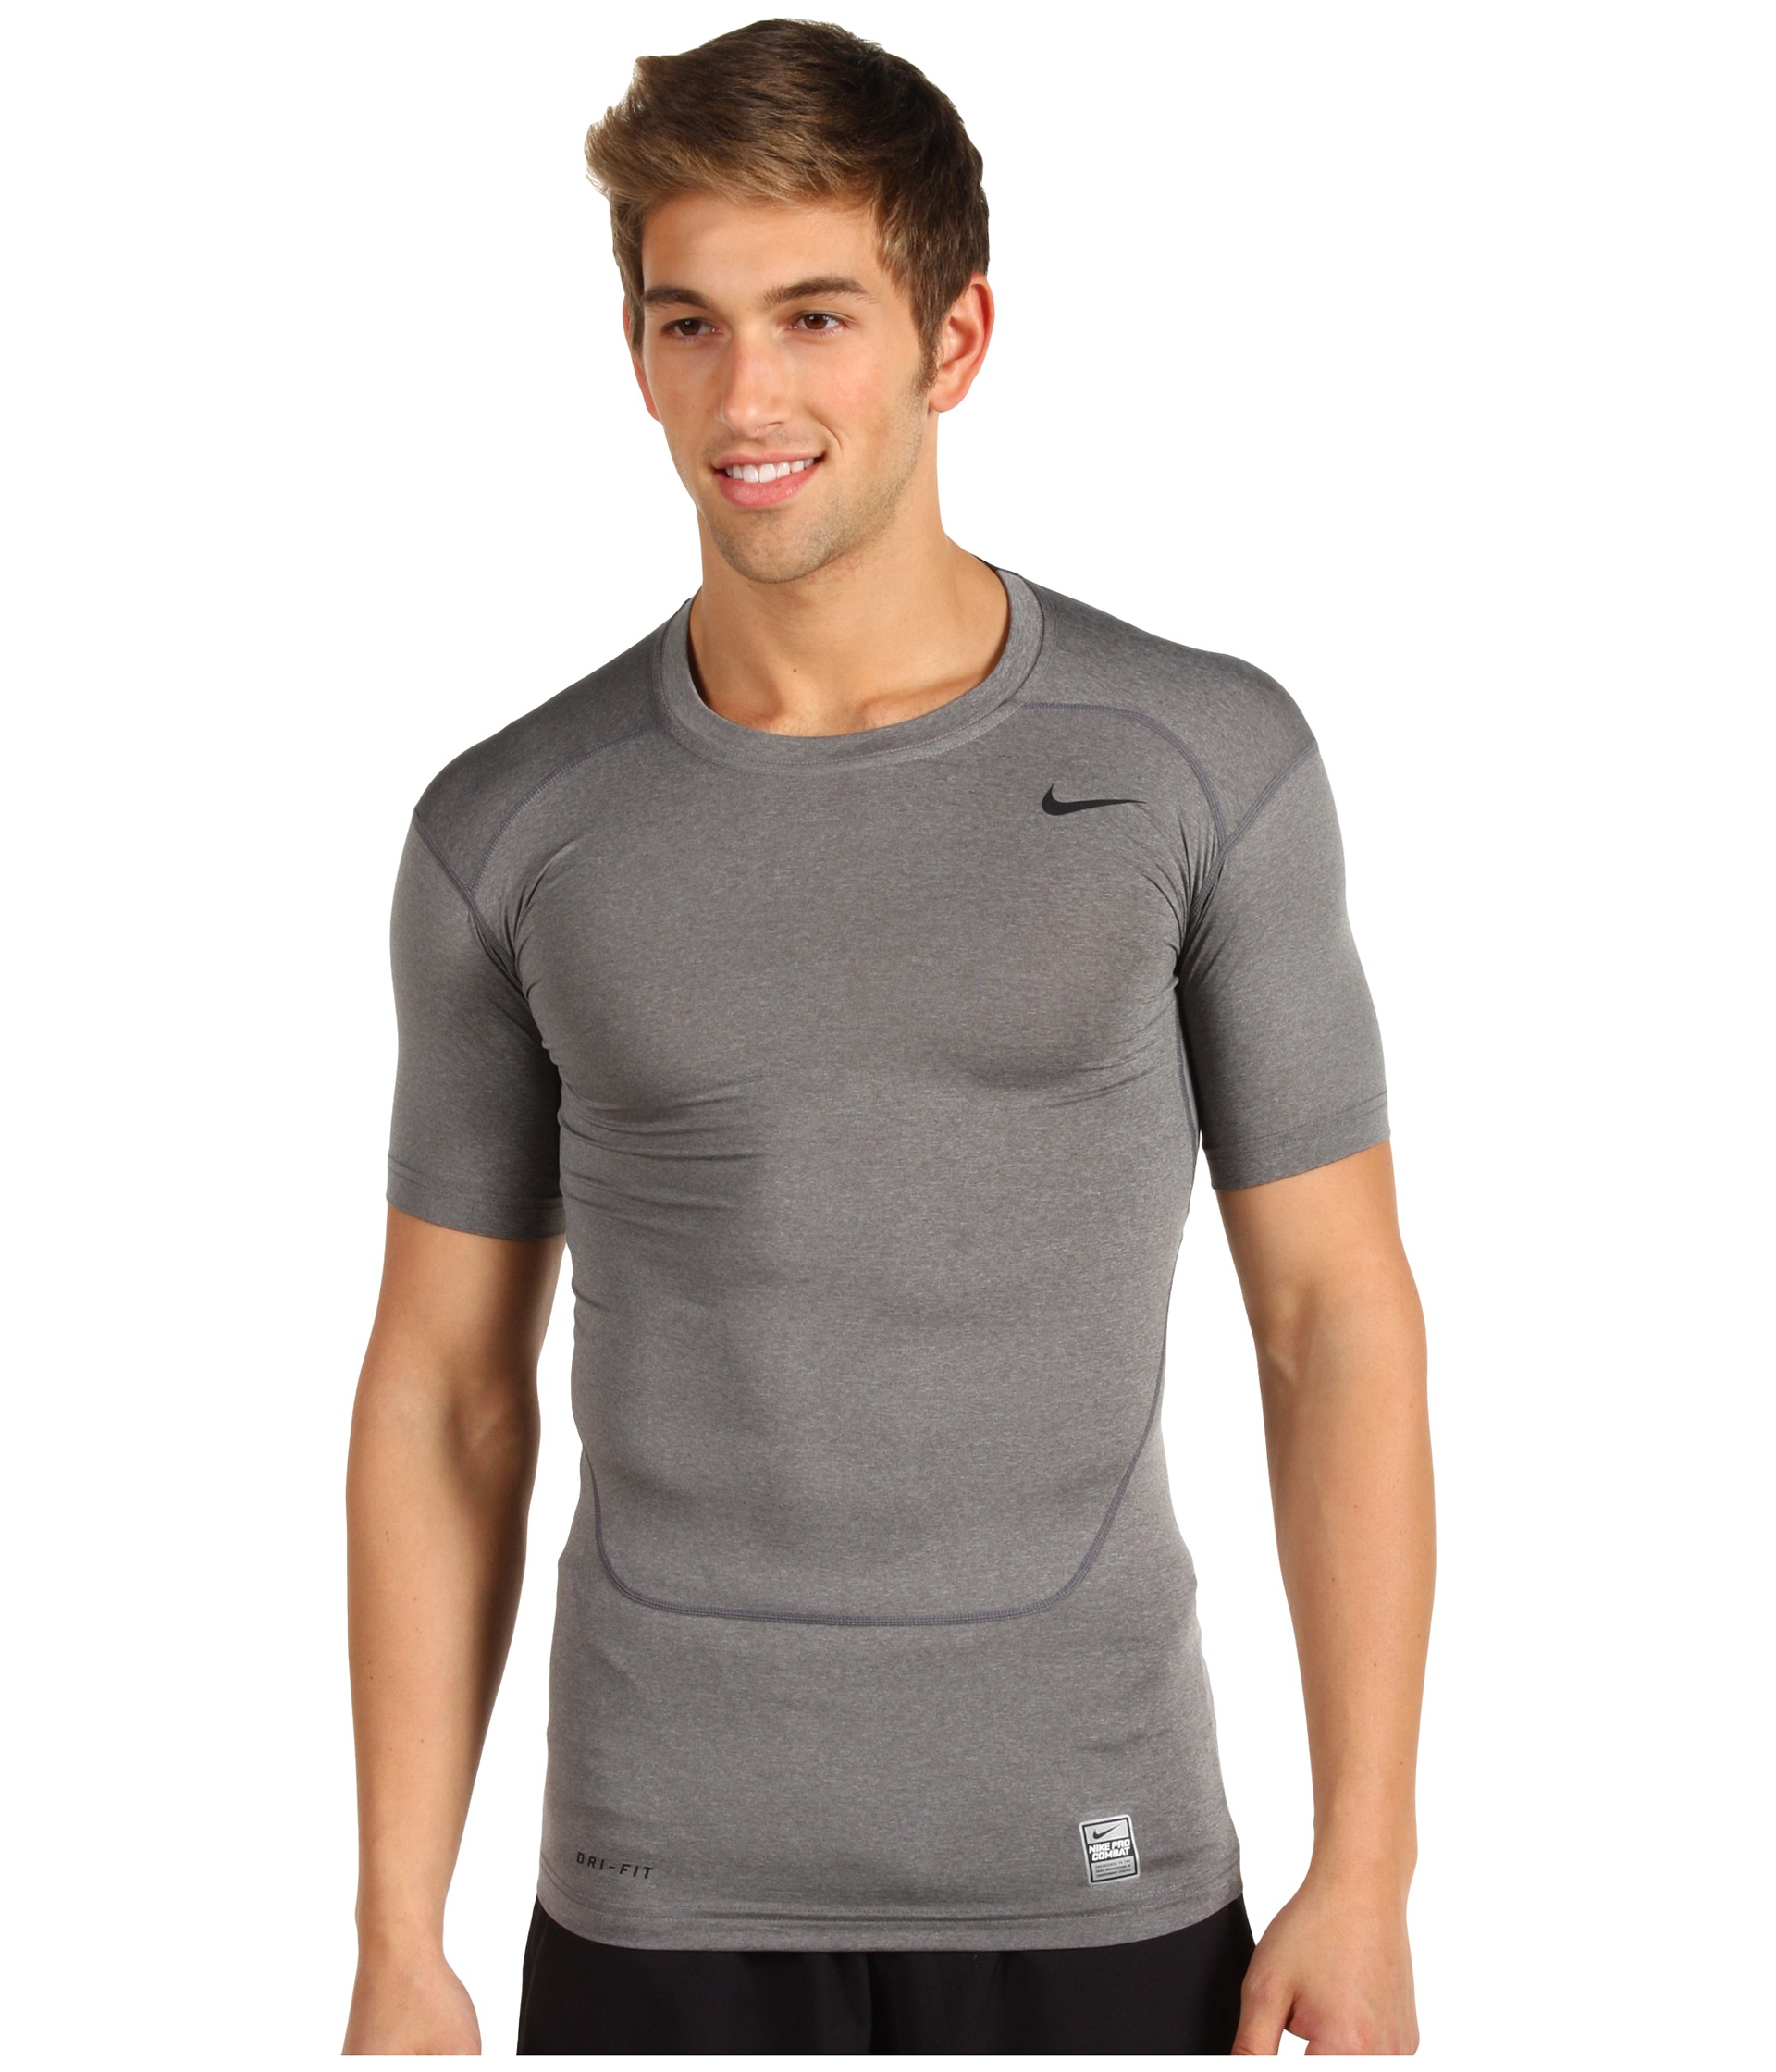 Lyst - Nike Pro Core Compression S/S Top 2.0 in Gray for Men